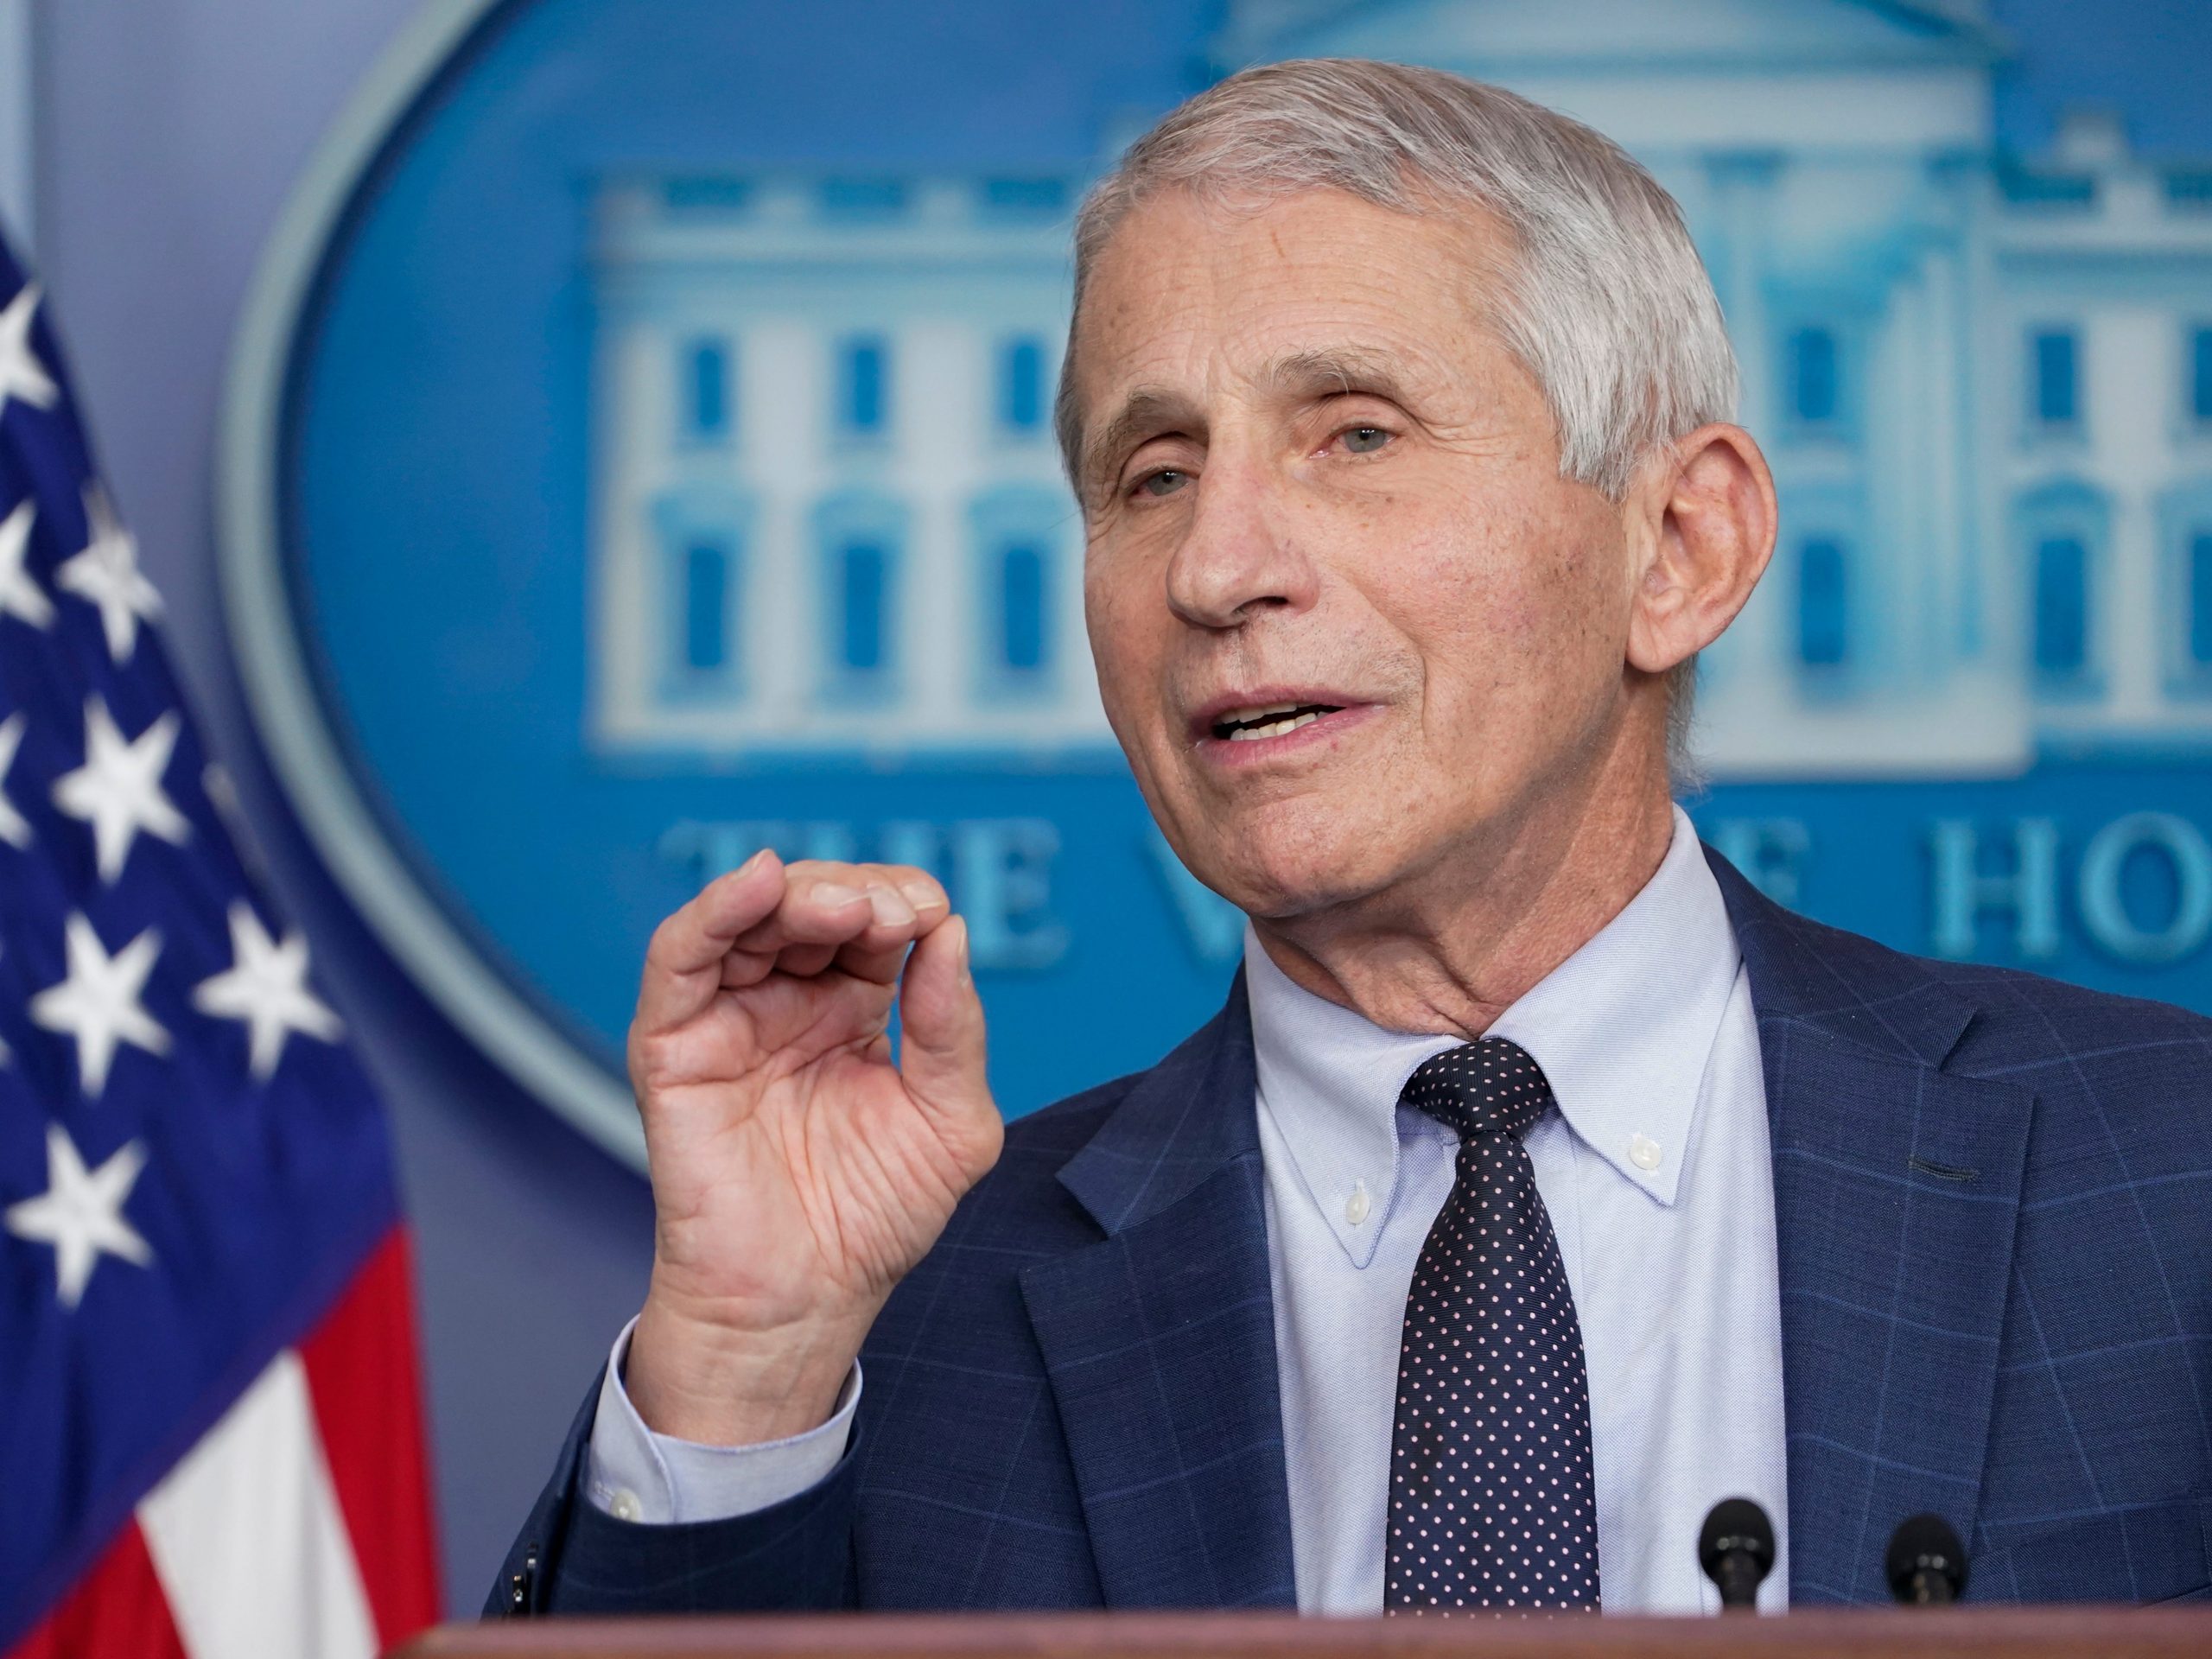 Dr. Anthony Fauci, director of the National Institute of Allergy and Infectious Diseases, speaks during the daily briefing at the White House in Washington, Wednesday, Dec. 1, 2021.